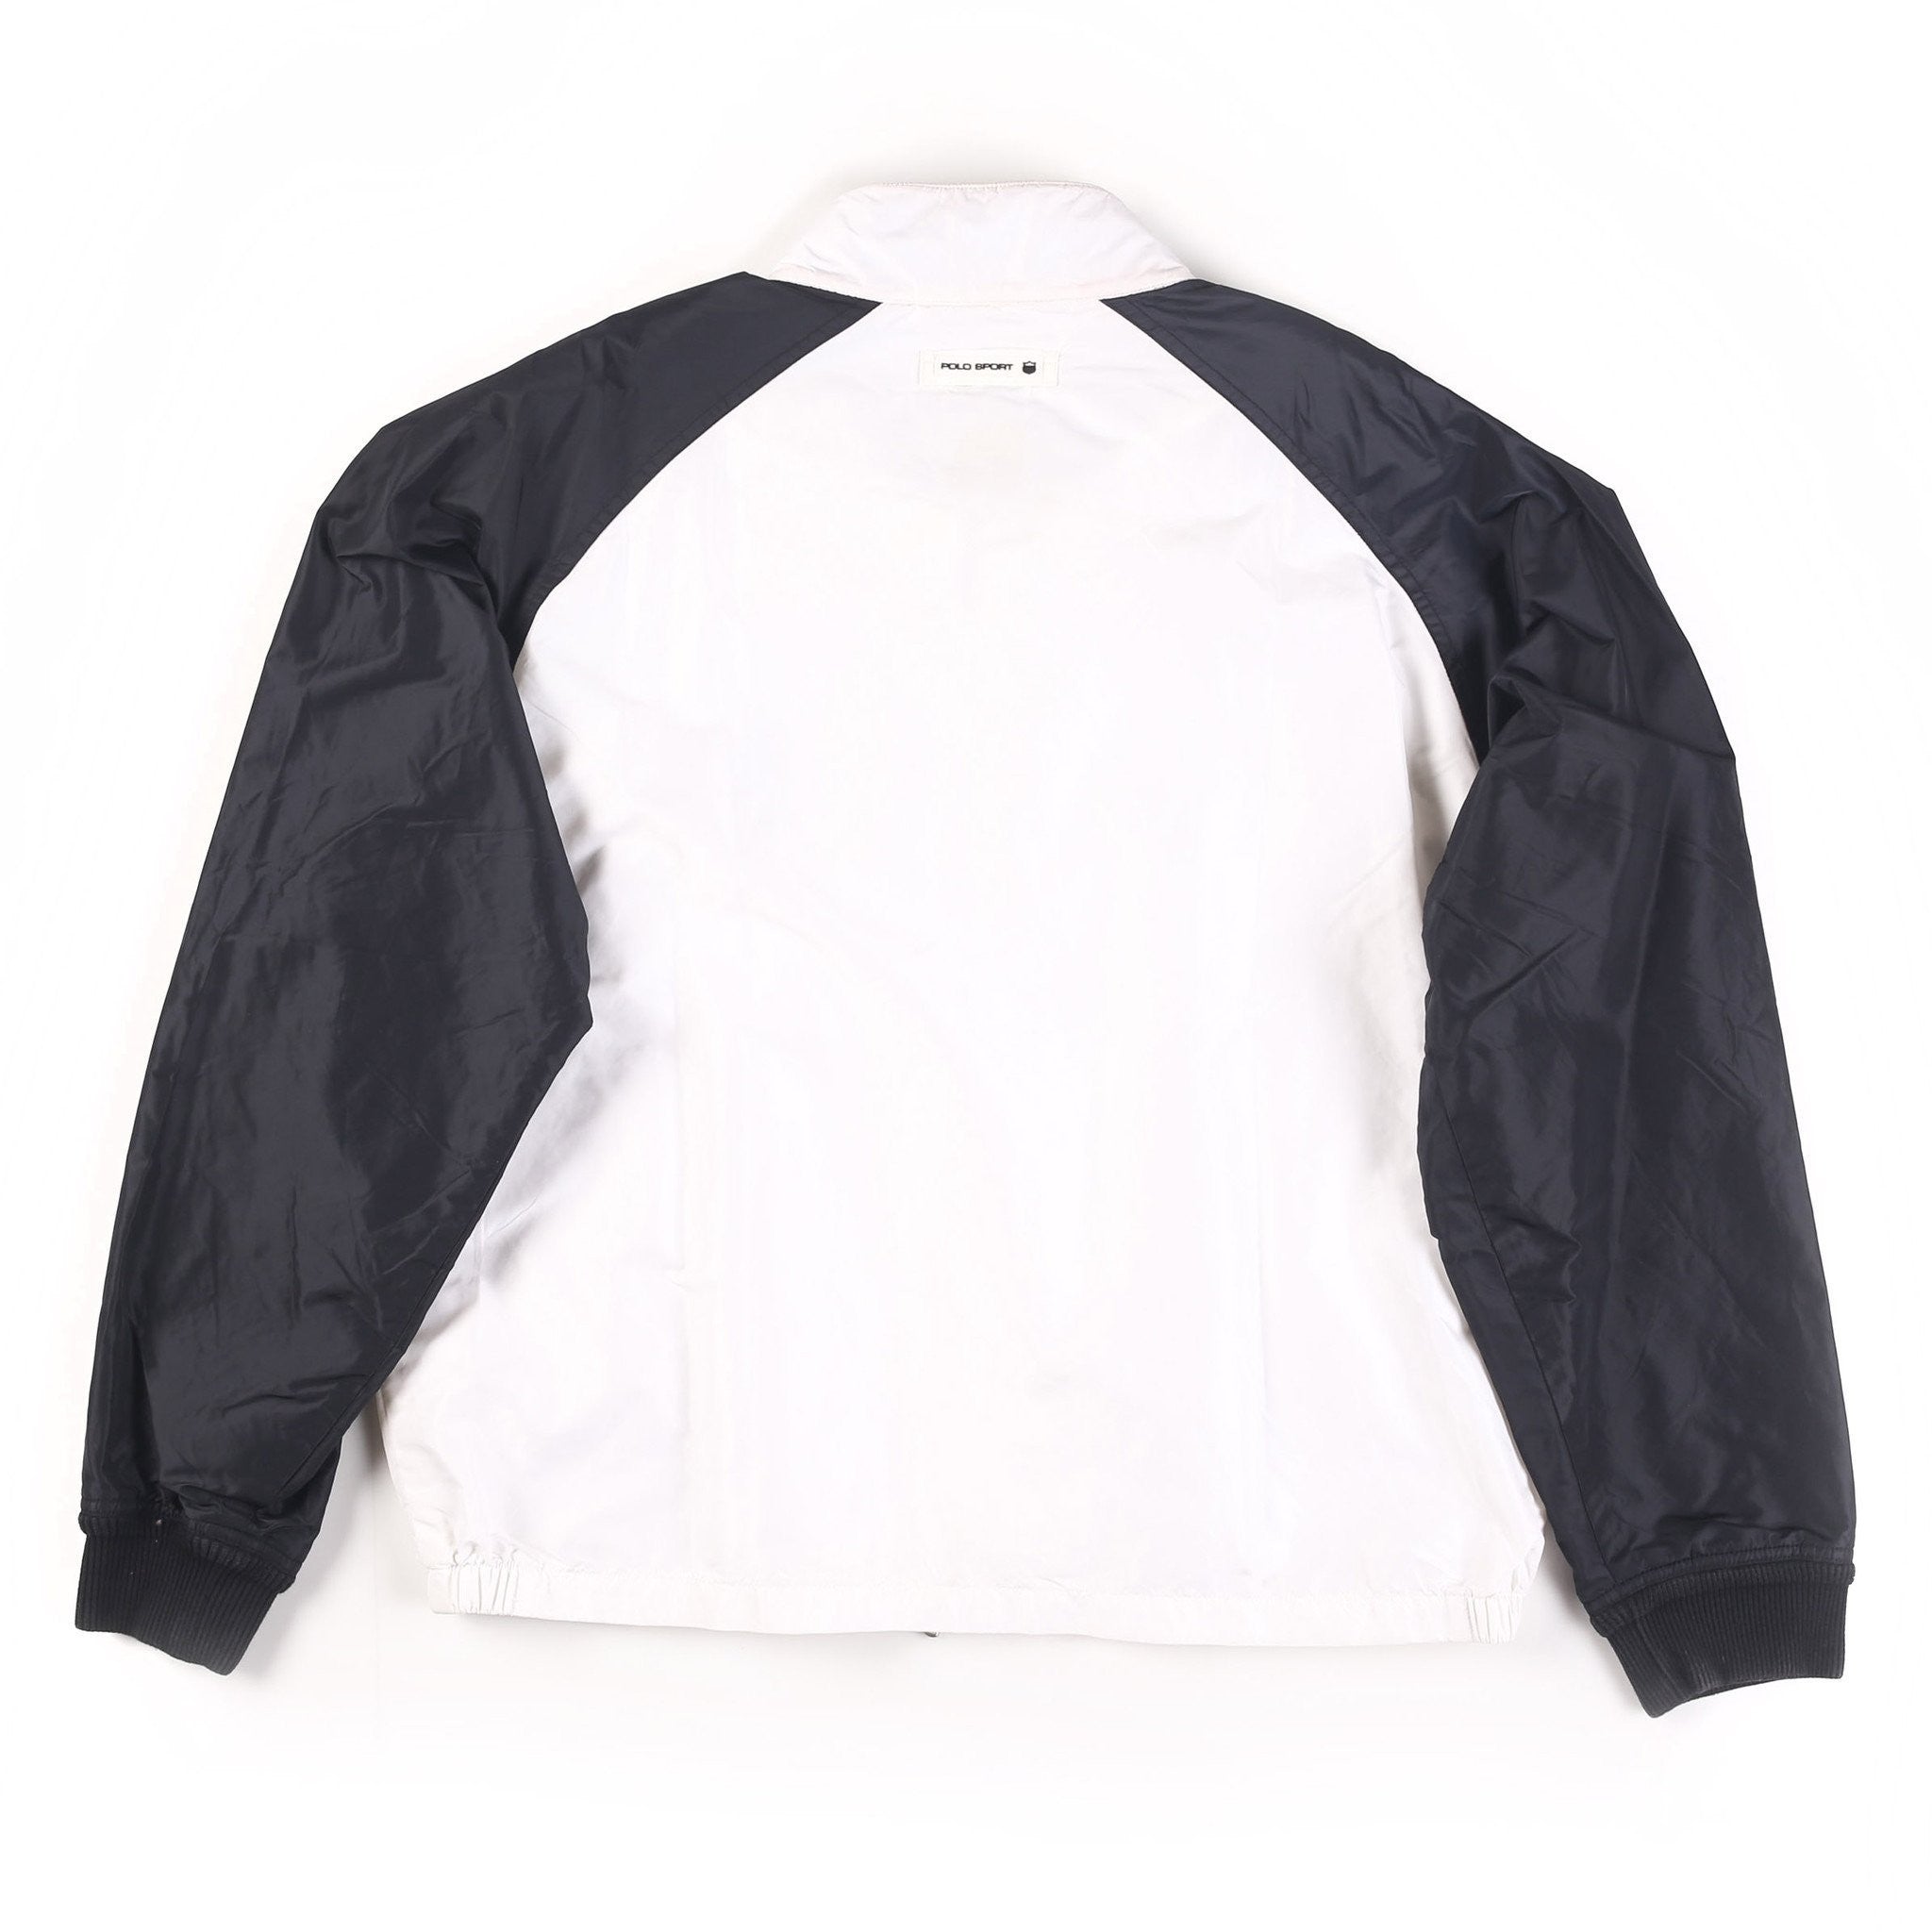 POLO SPORT OLYMPIC H 1992 SHIELD JACKET // WHITE